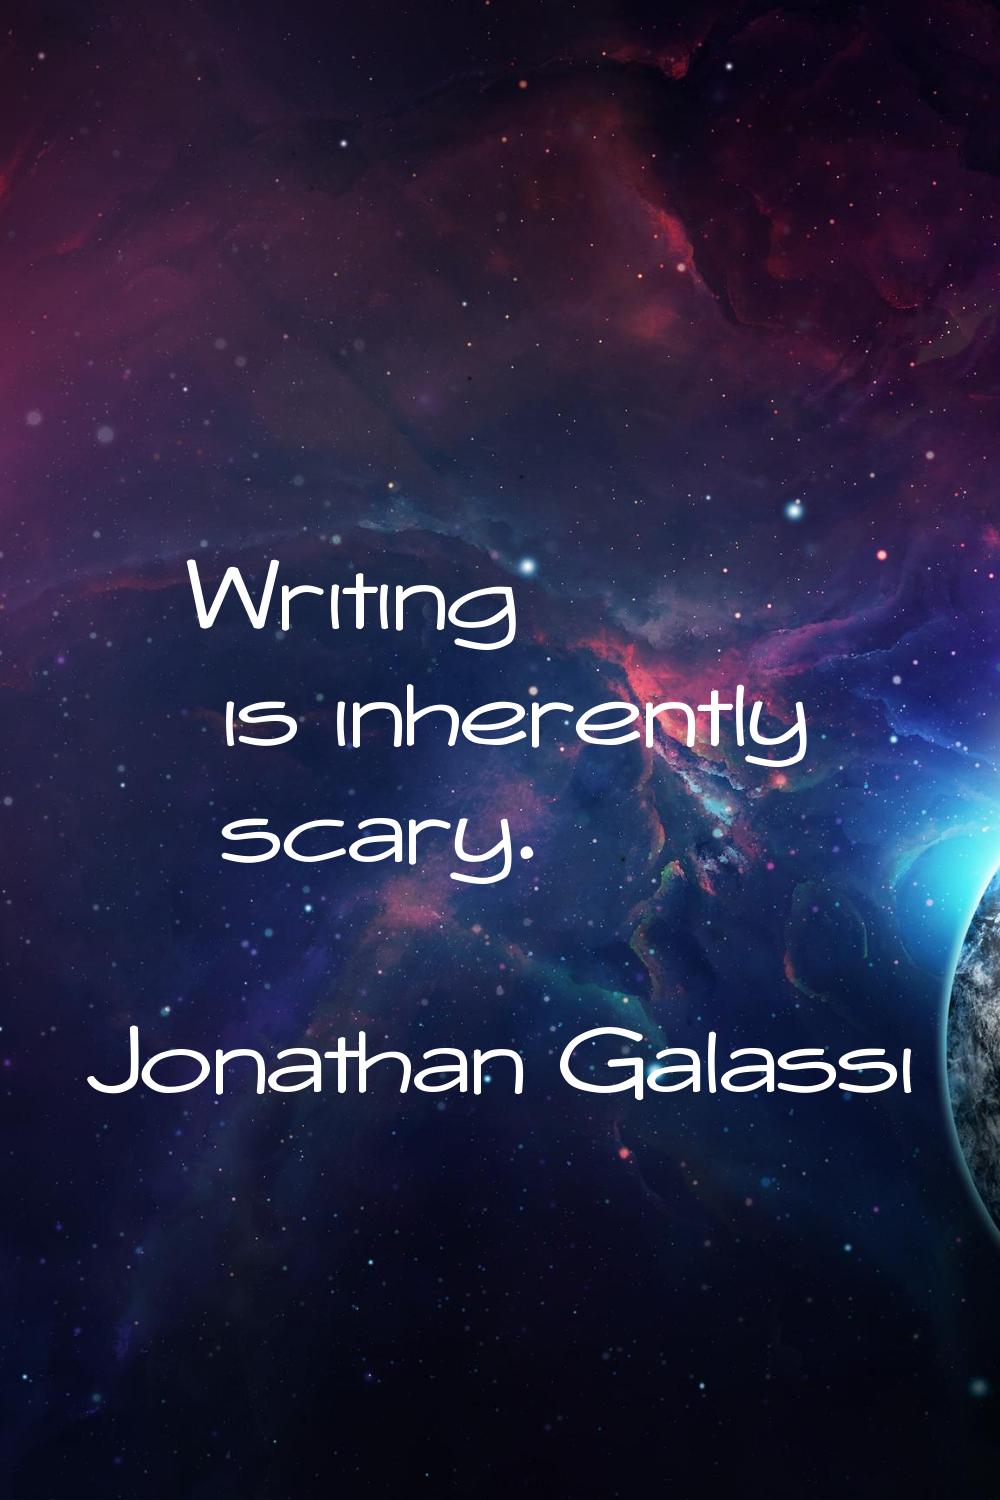 Writing is inherently scary.